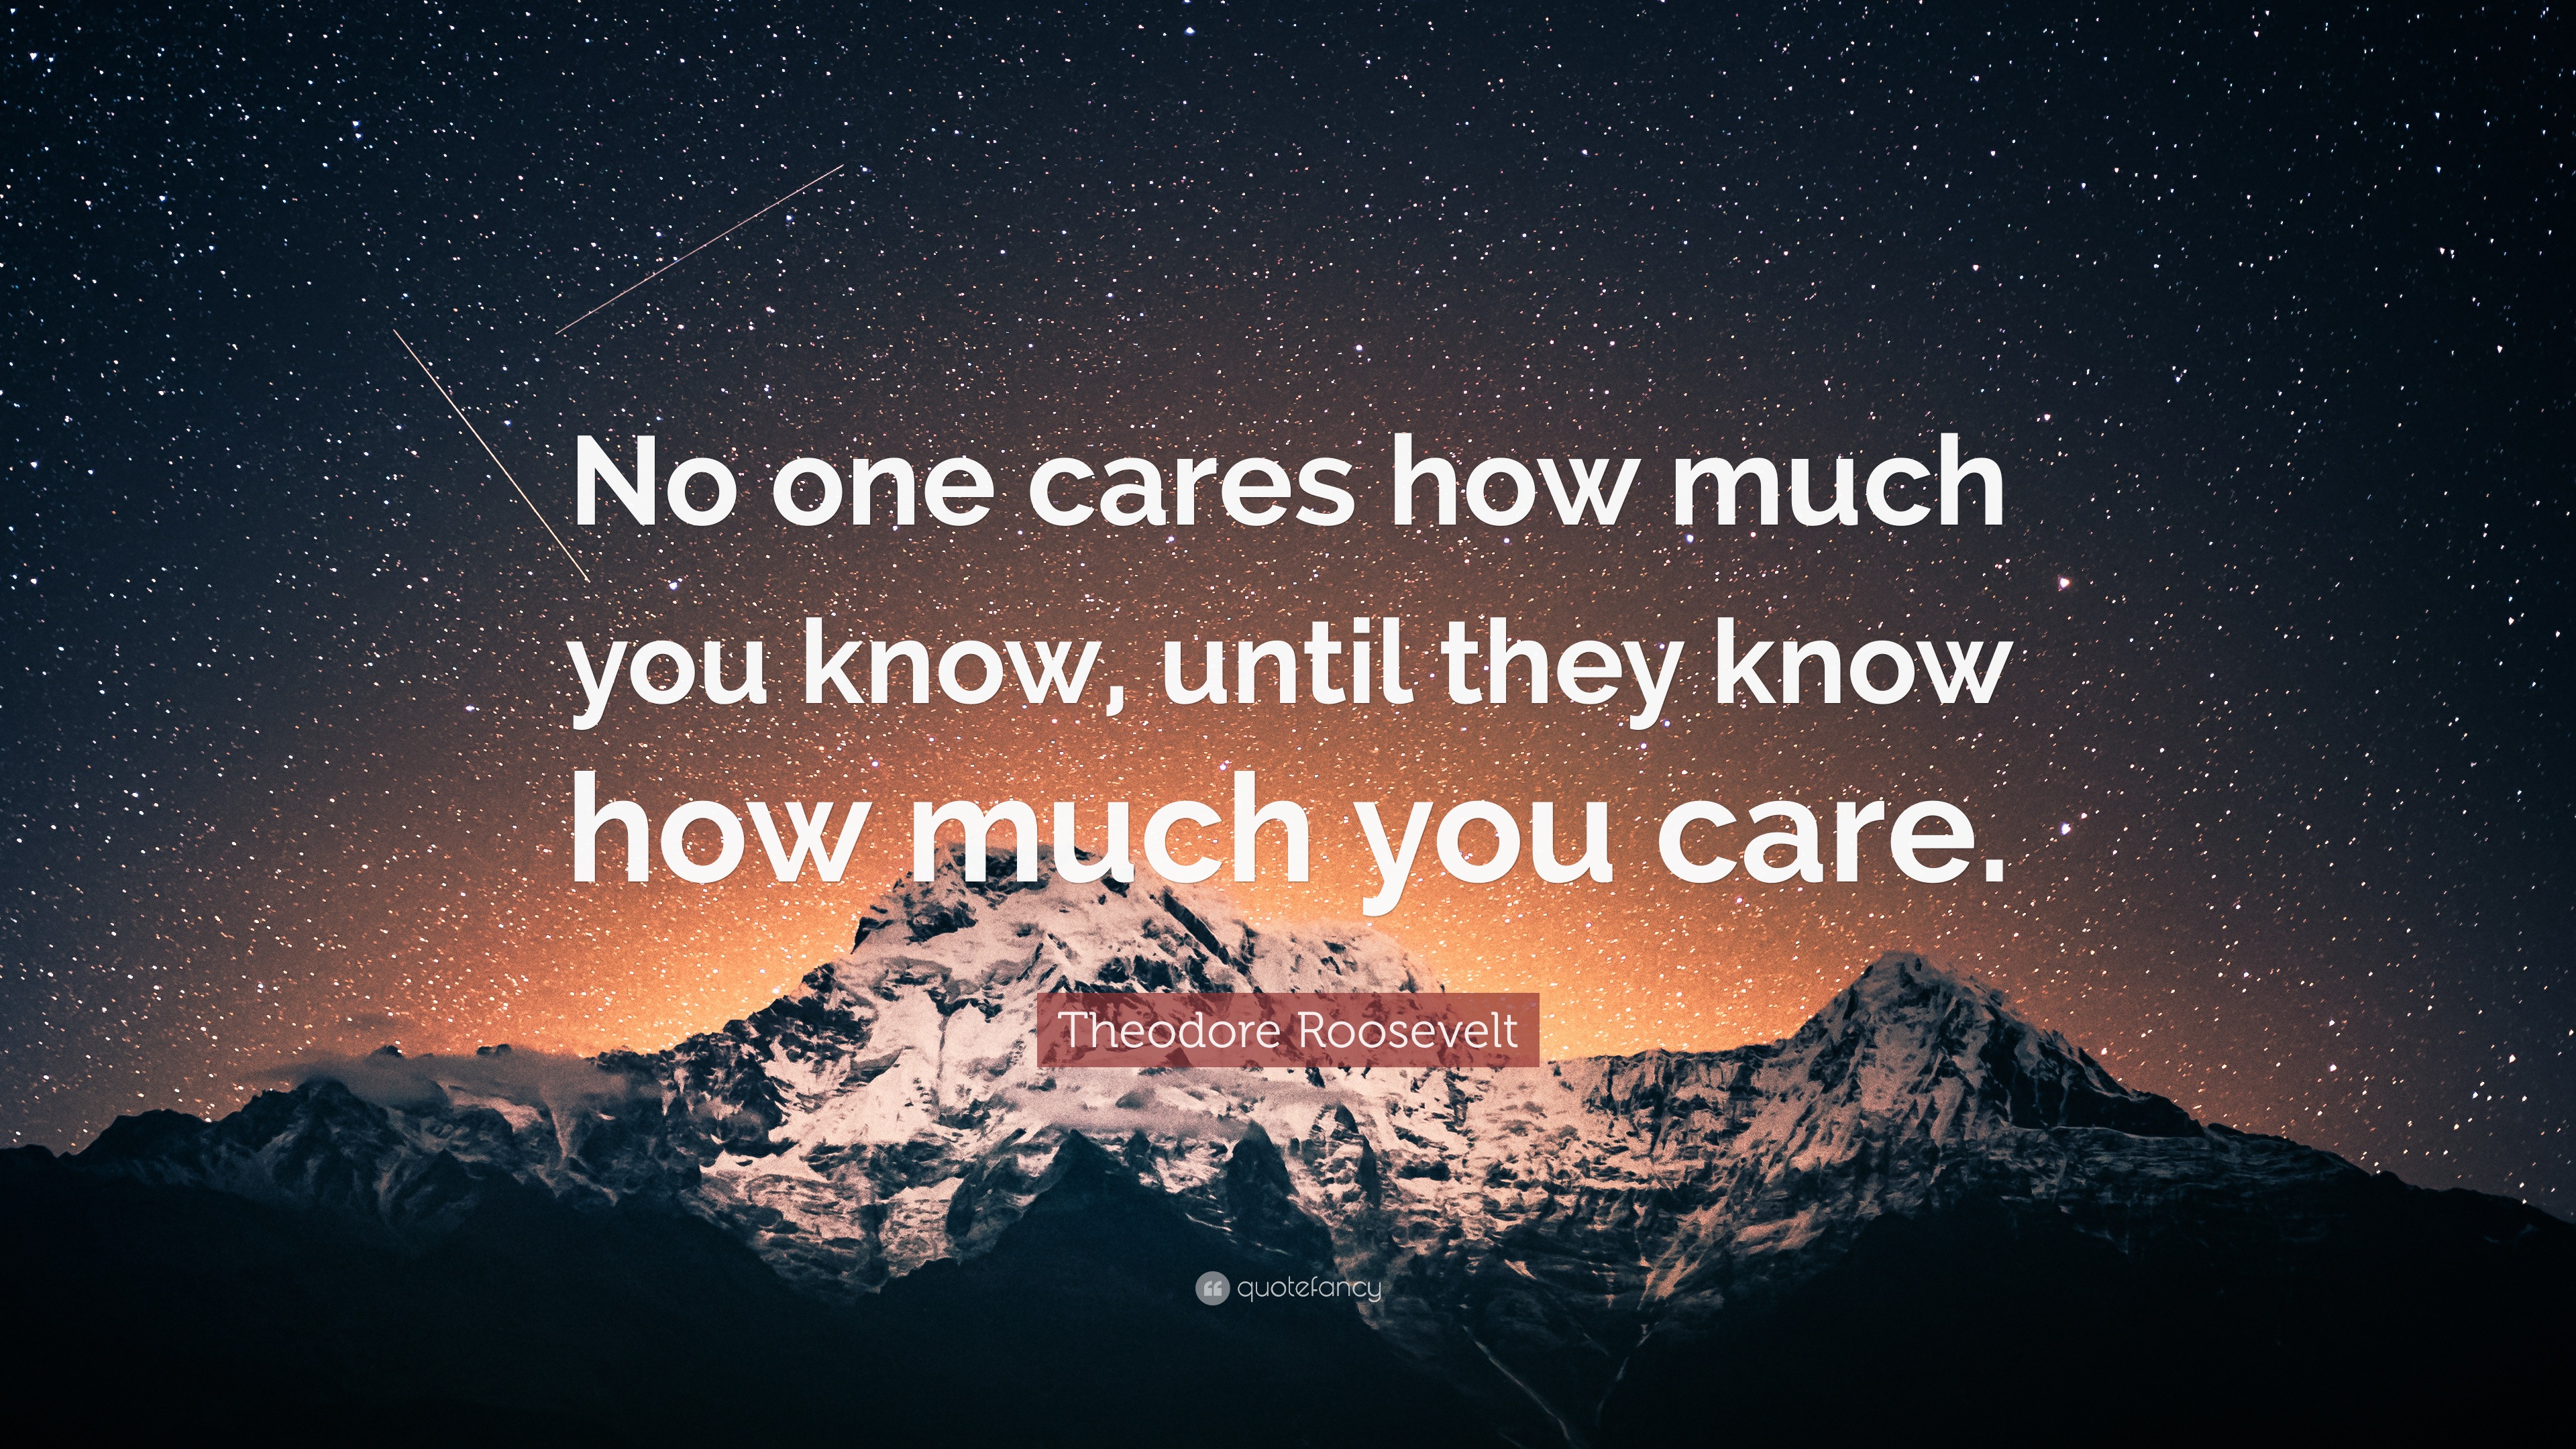 Theodore Roosevelt Quote: “No one cares how much you know, until they